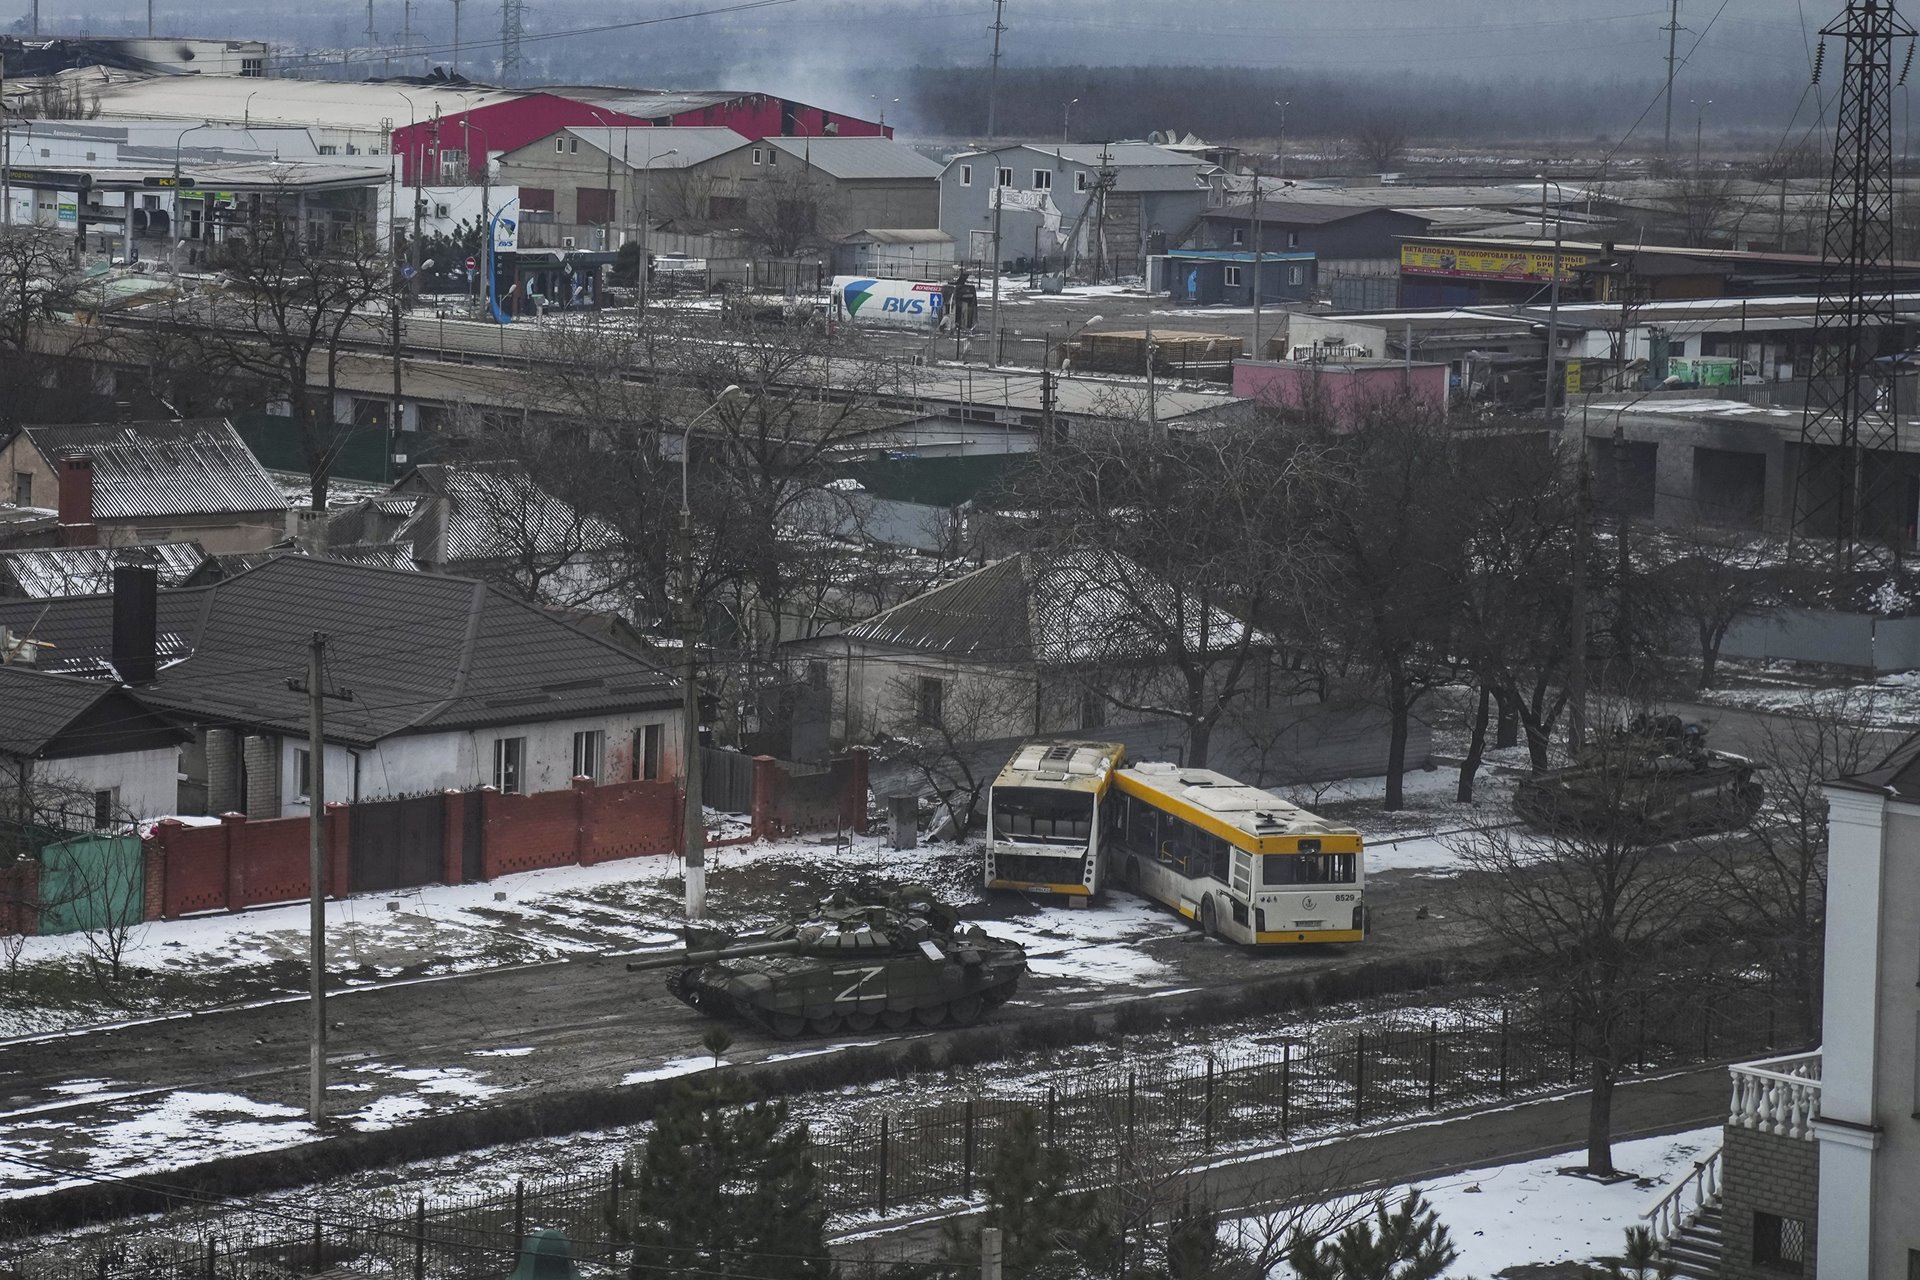 <p>Russian army tanks move through a street on the outskirts of Mariupol. The Z marking is one of several symbols painted on Russian military vehicles in the early stages of the invasion.</p>
